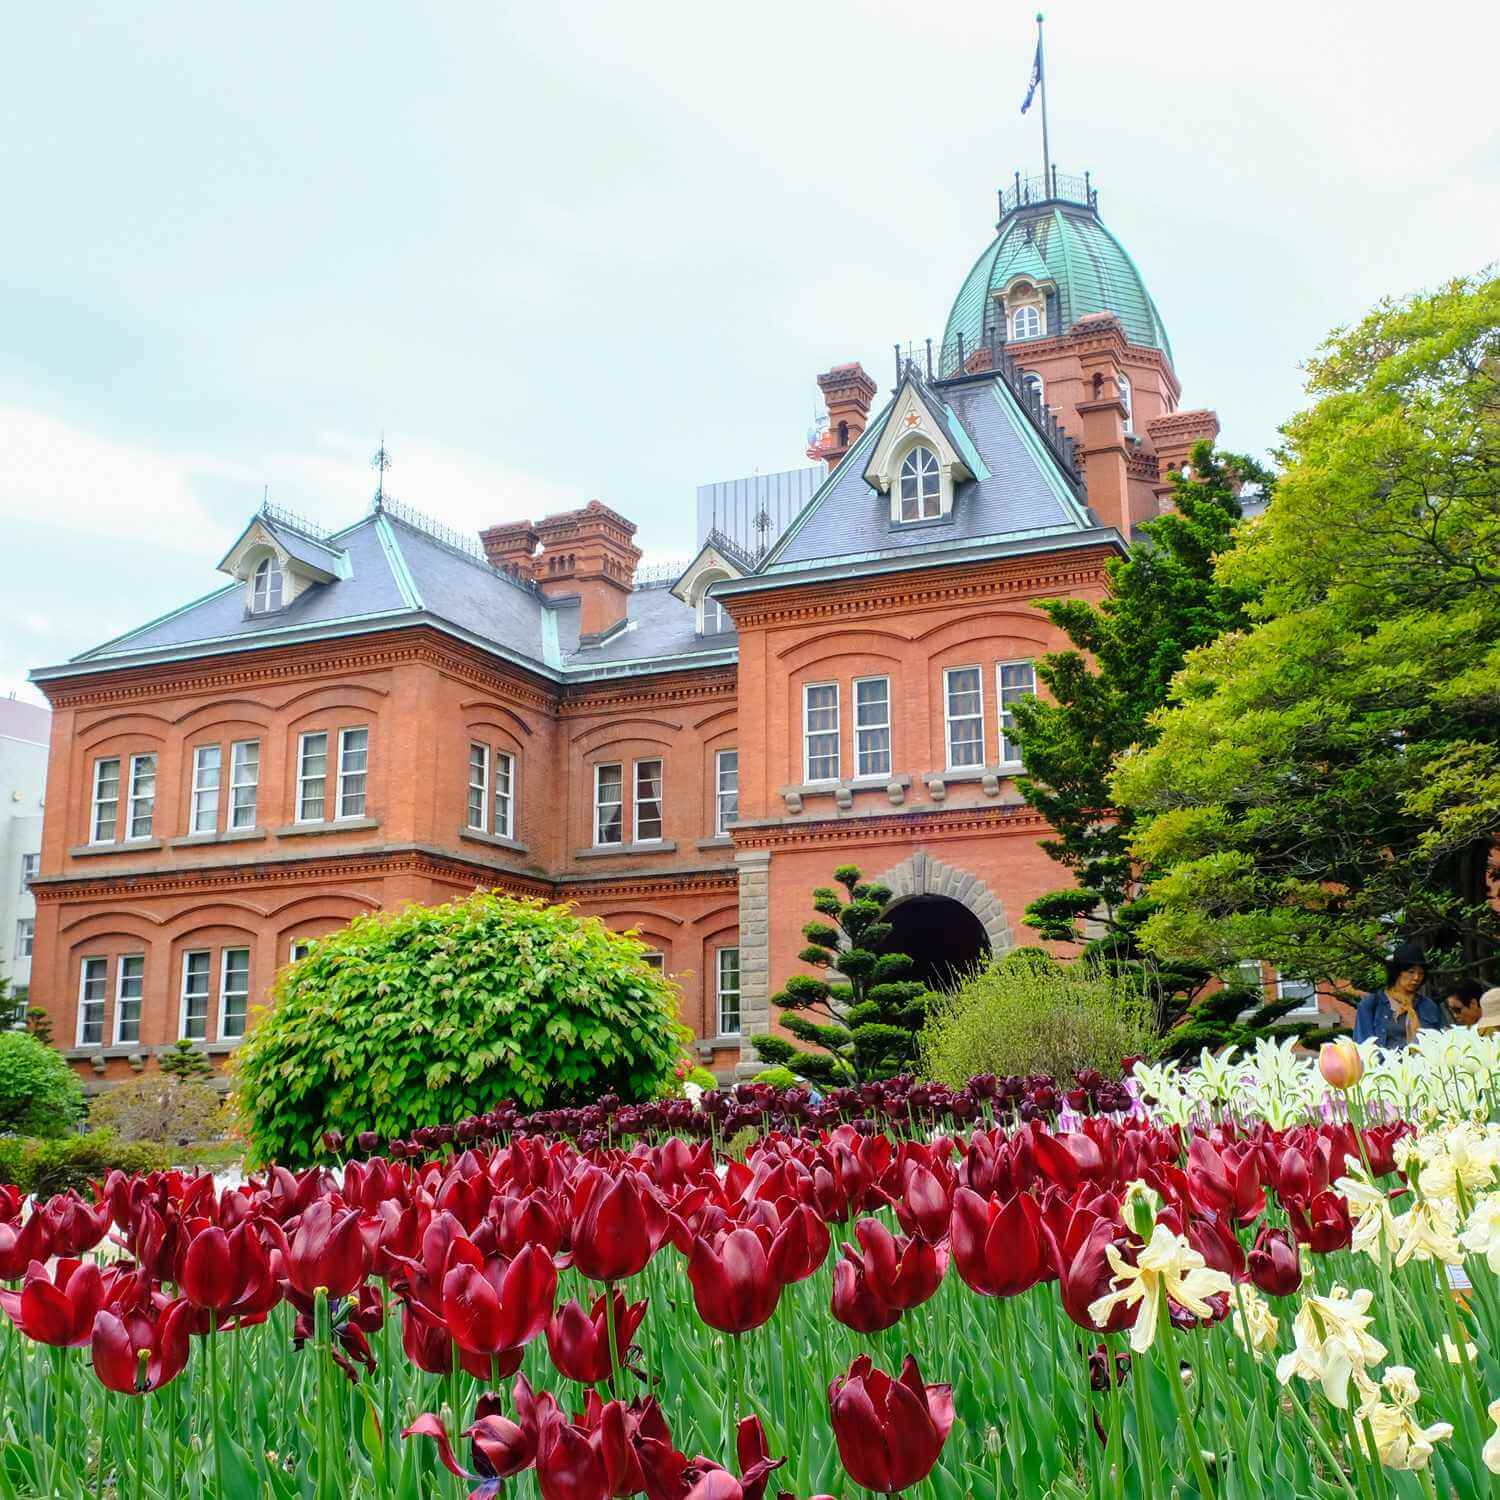 The old Hokkaido Government Office Building during spring season in Sapporo = Shutterstock